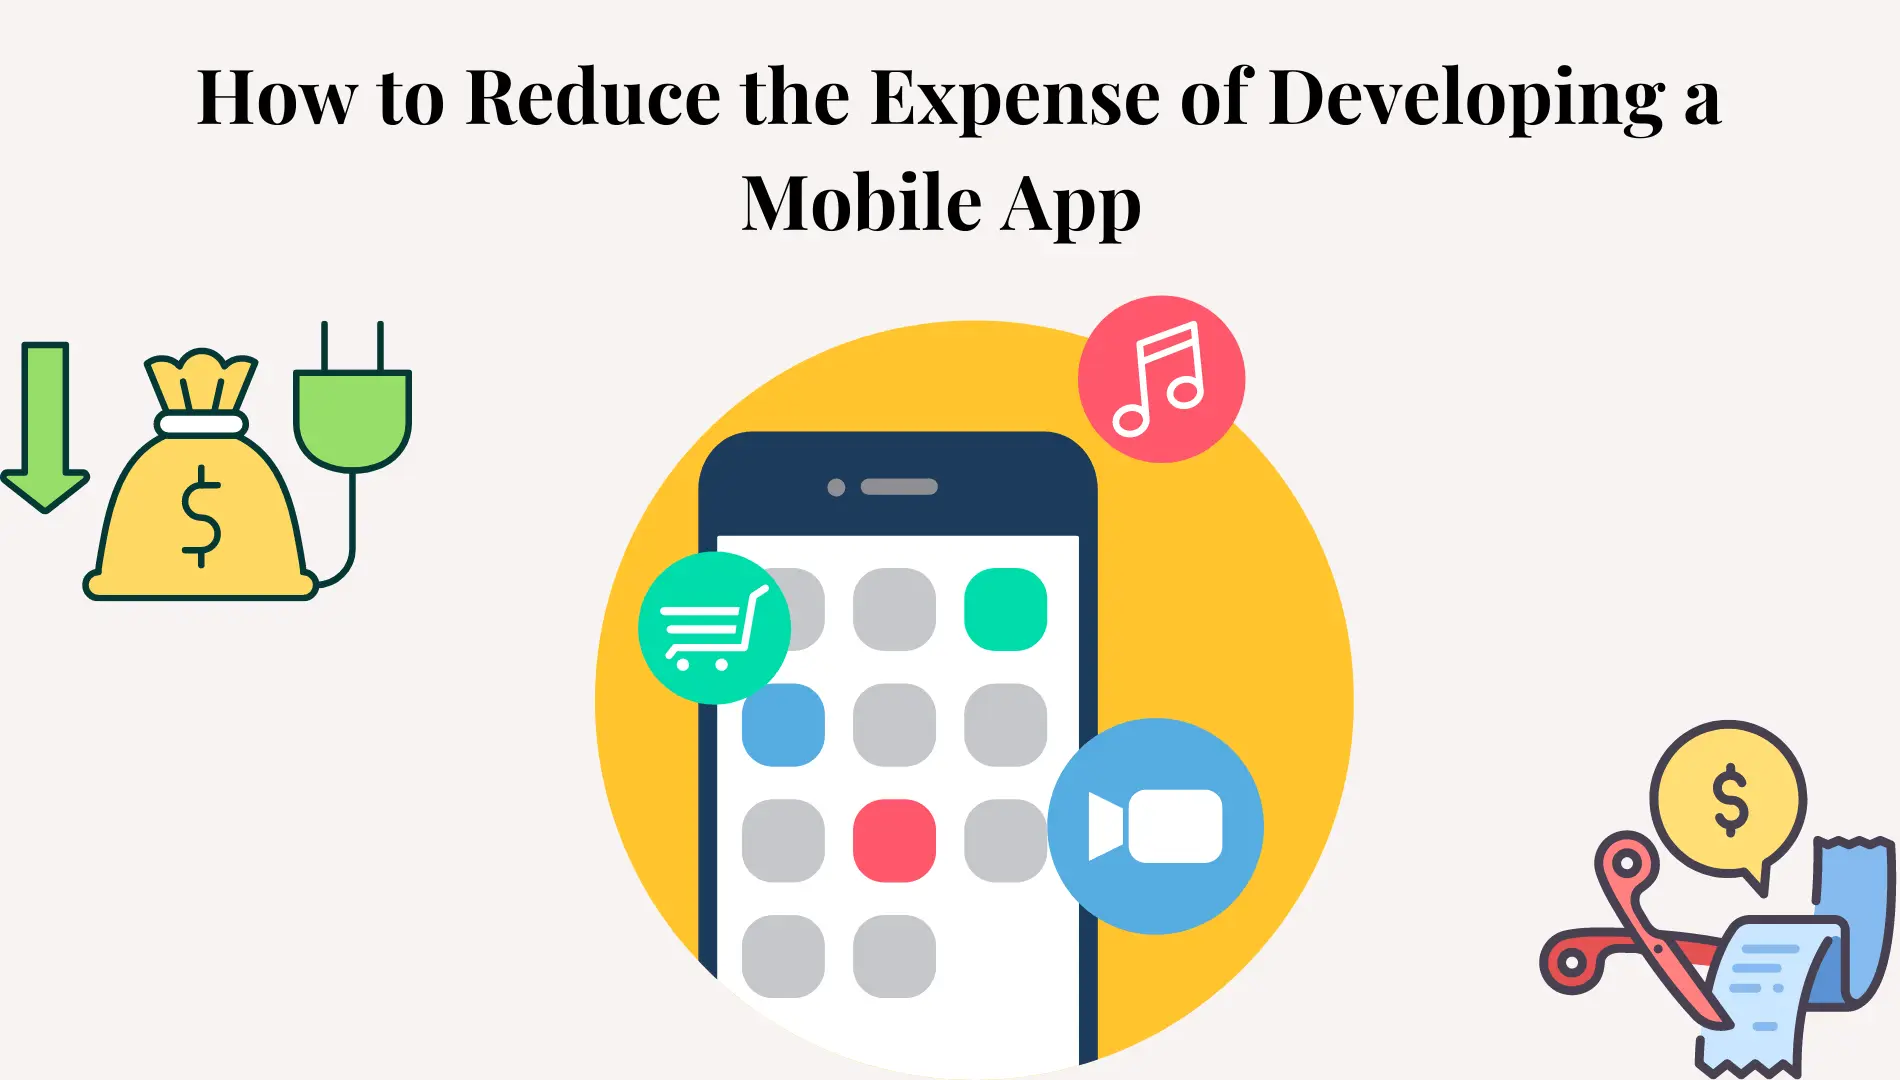  How to Reduce the Expense of Developing a Mobile App 